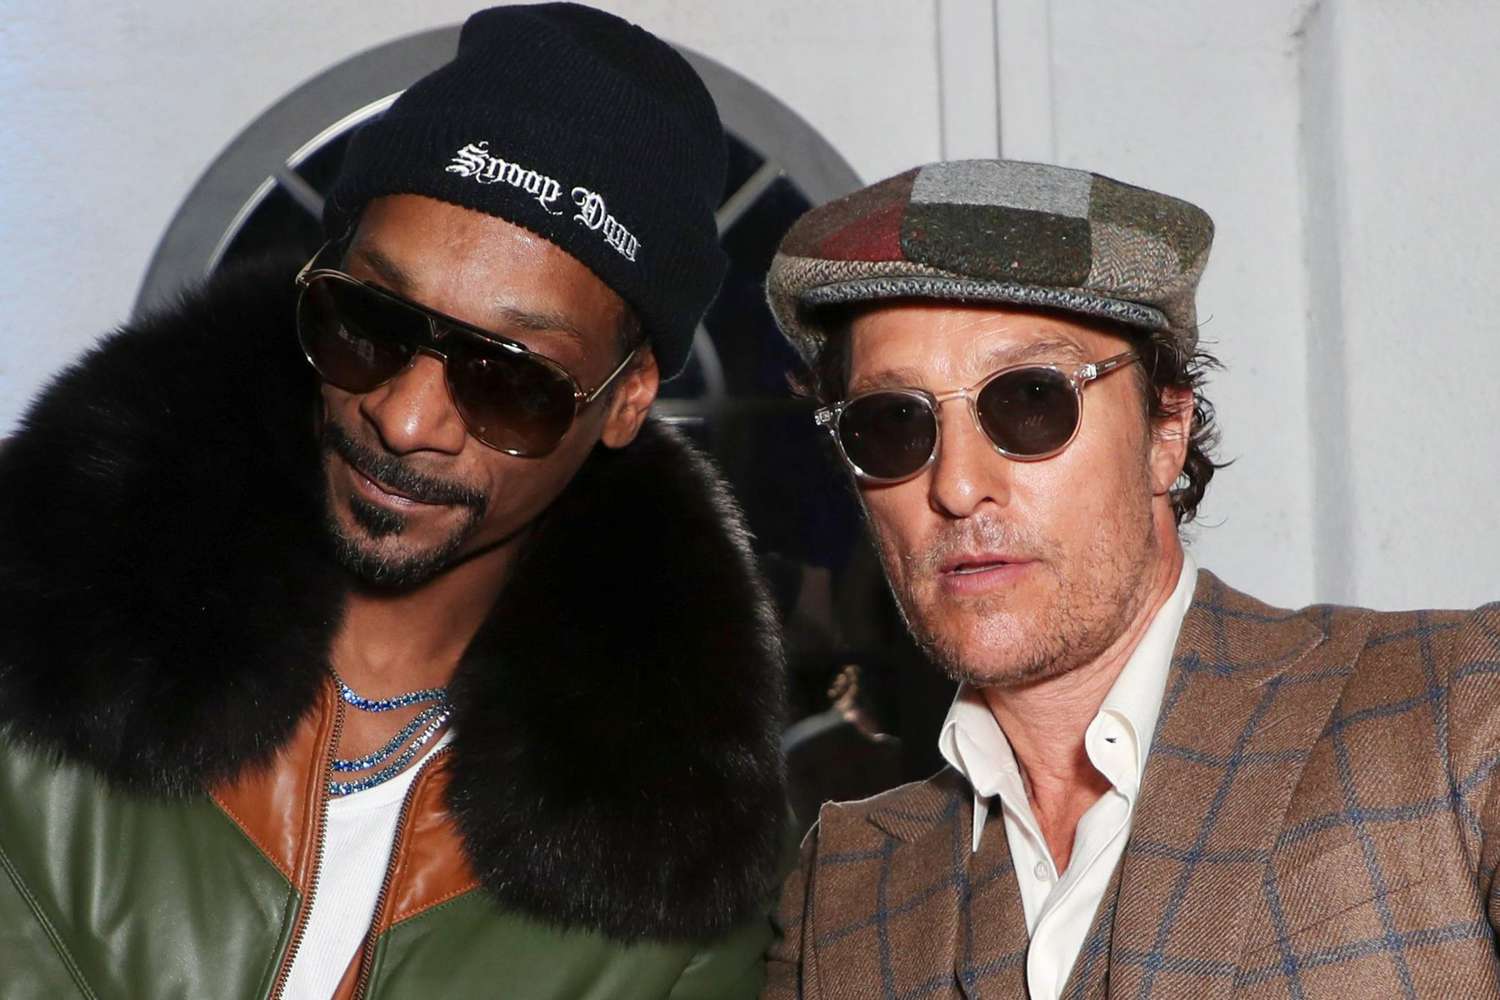 That Time Matthew McConaughey Accidentally Smoked Snoop Dogg's Weed ...